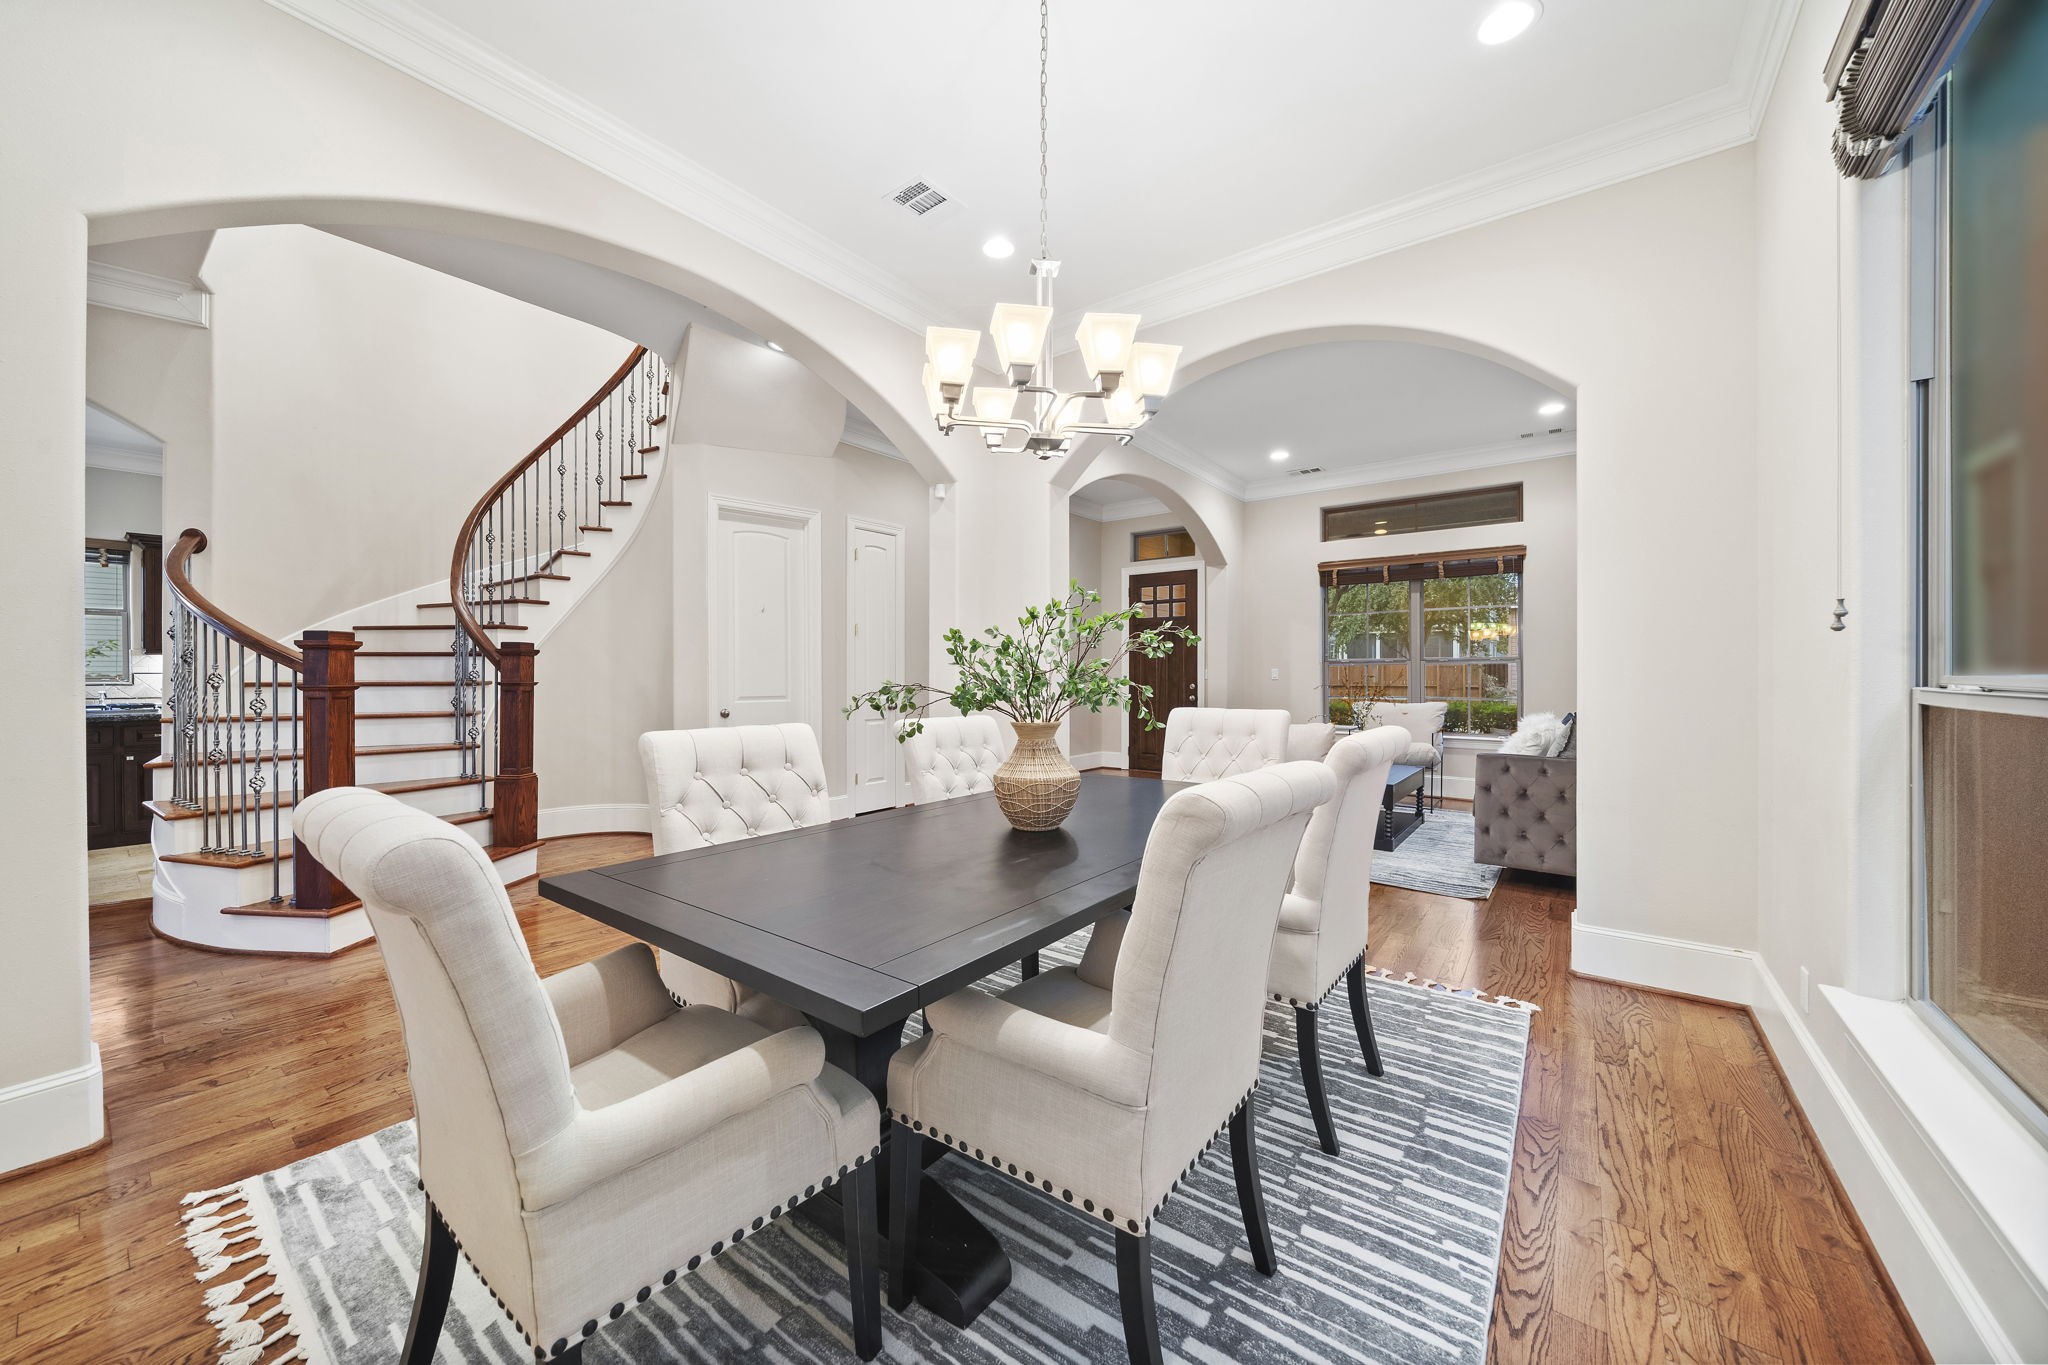 The formal dining room is bathed in natural light and presents the perfect spot to seat a large group of guests, all while leaving ample space to move around.